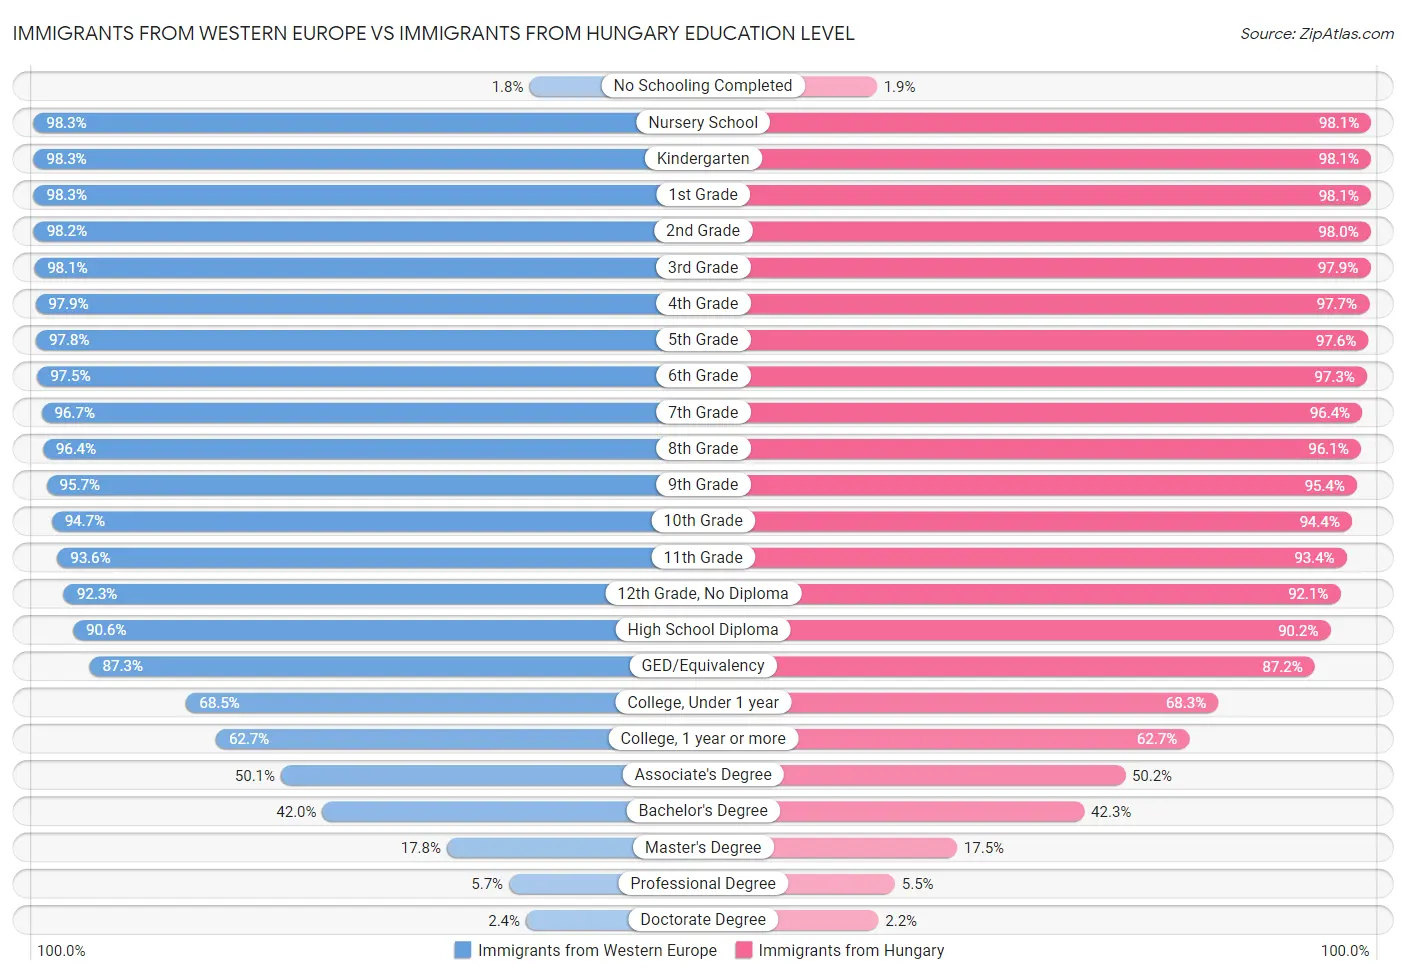 Immigrants from Western Europe vs Immigrants from Hungary Education Level